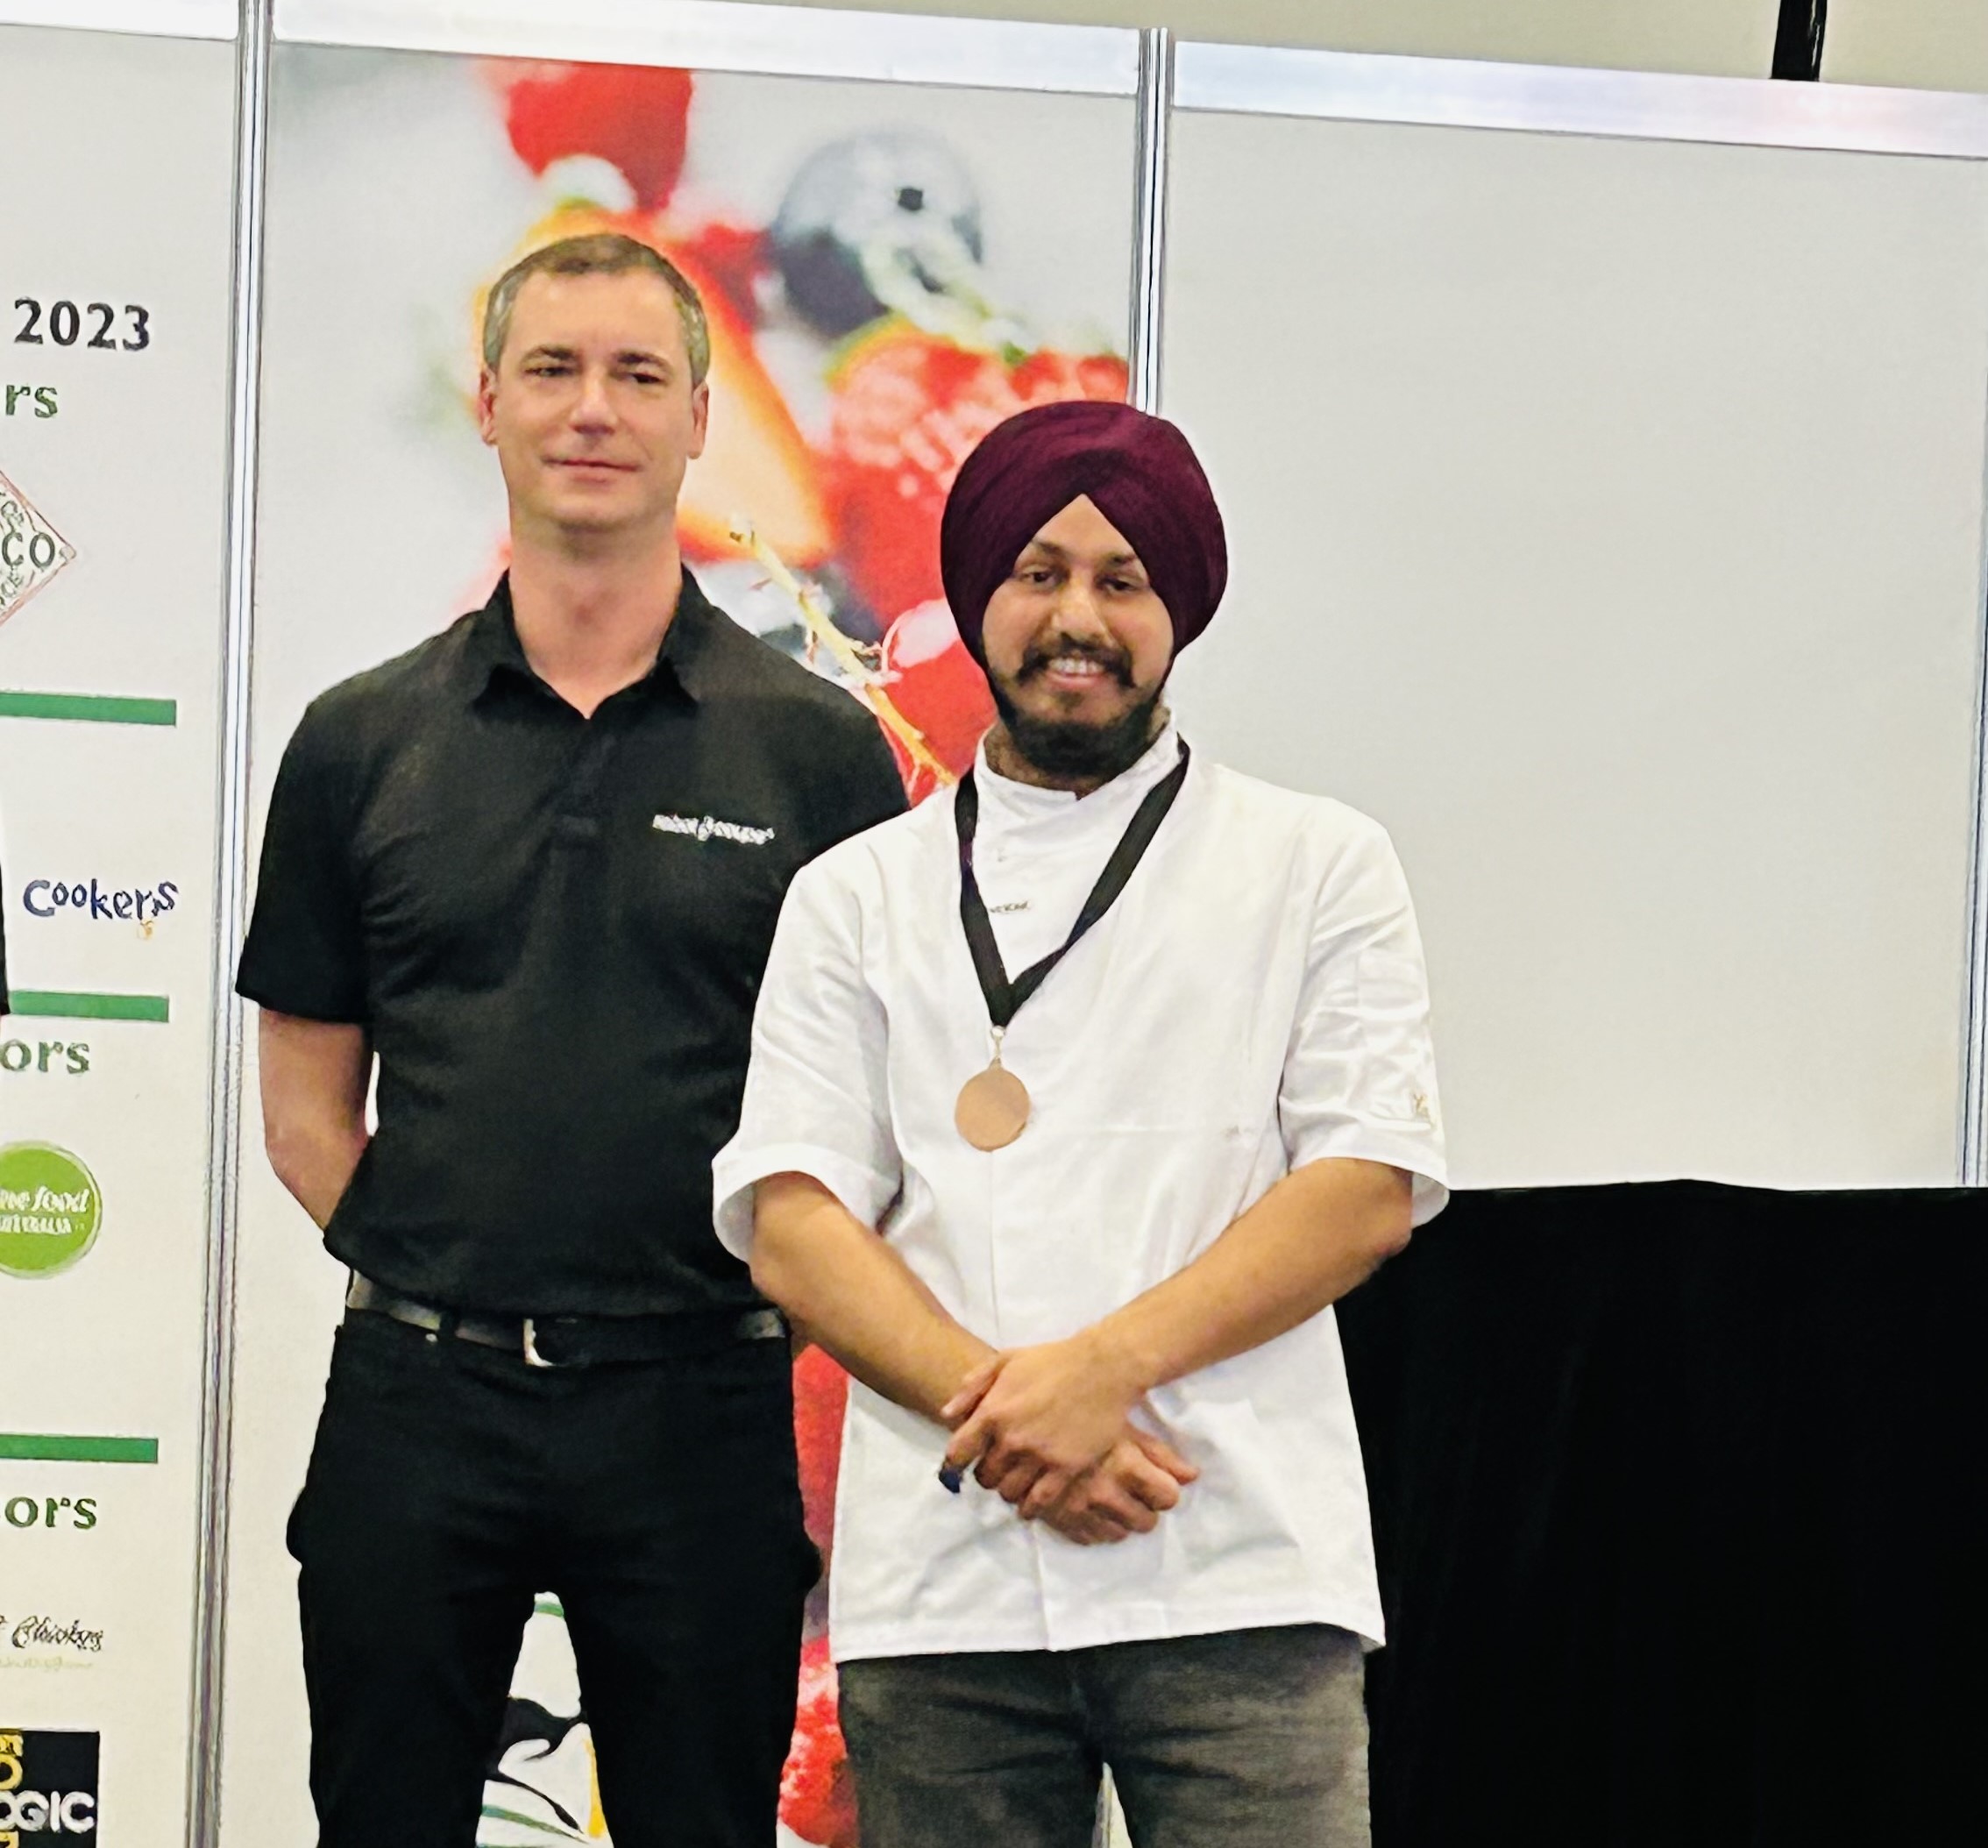 Lovepreet Singh with a medal around his neck standing with his teacher